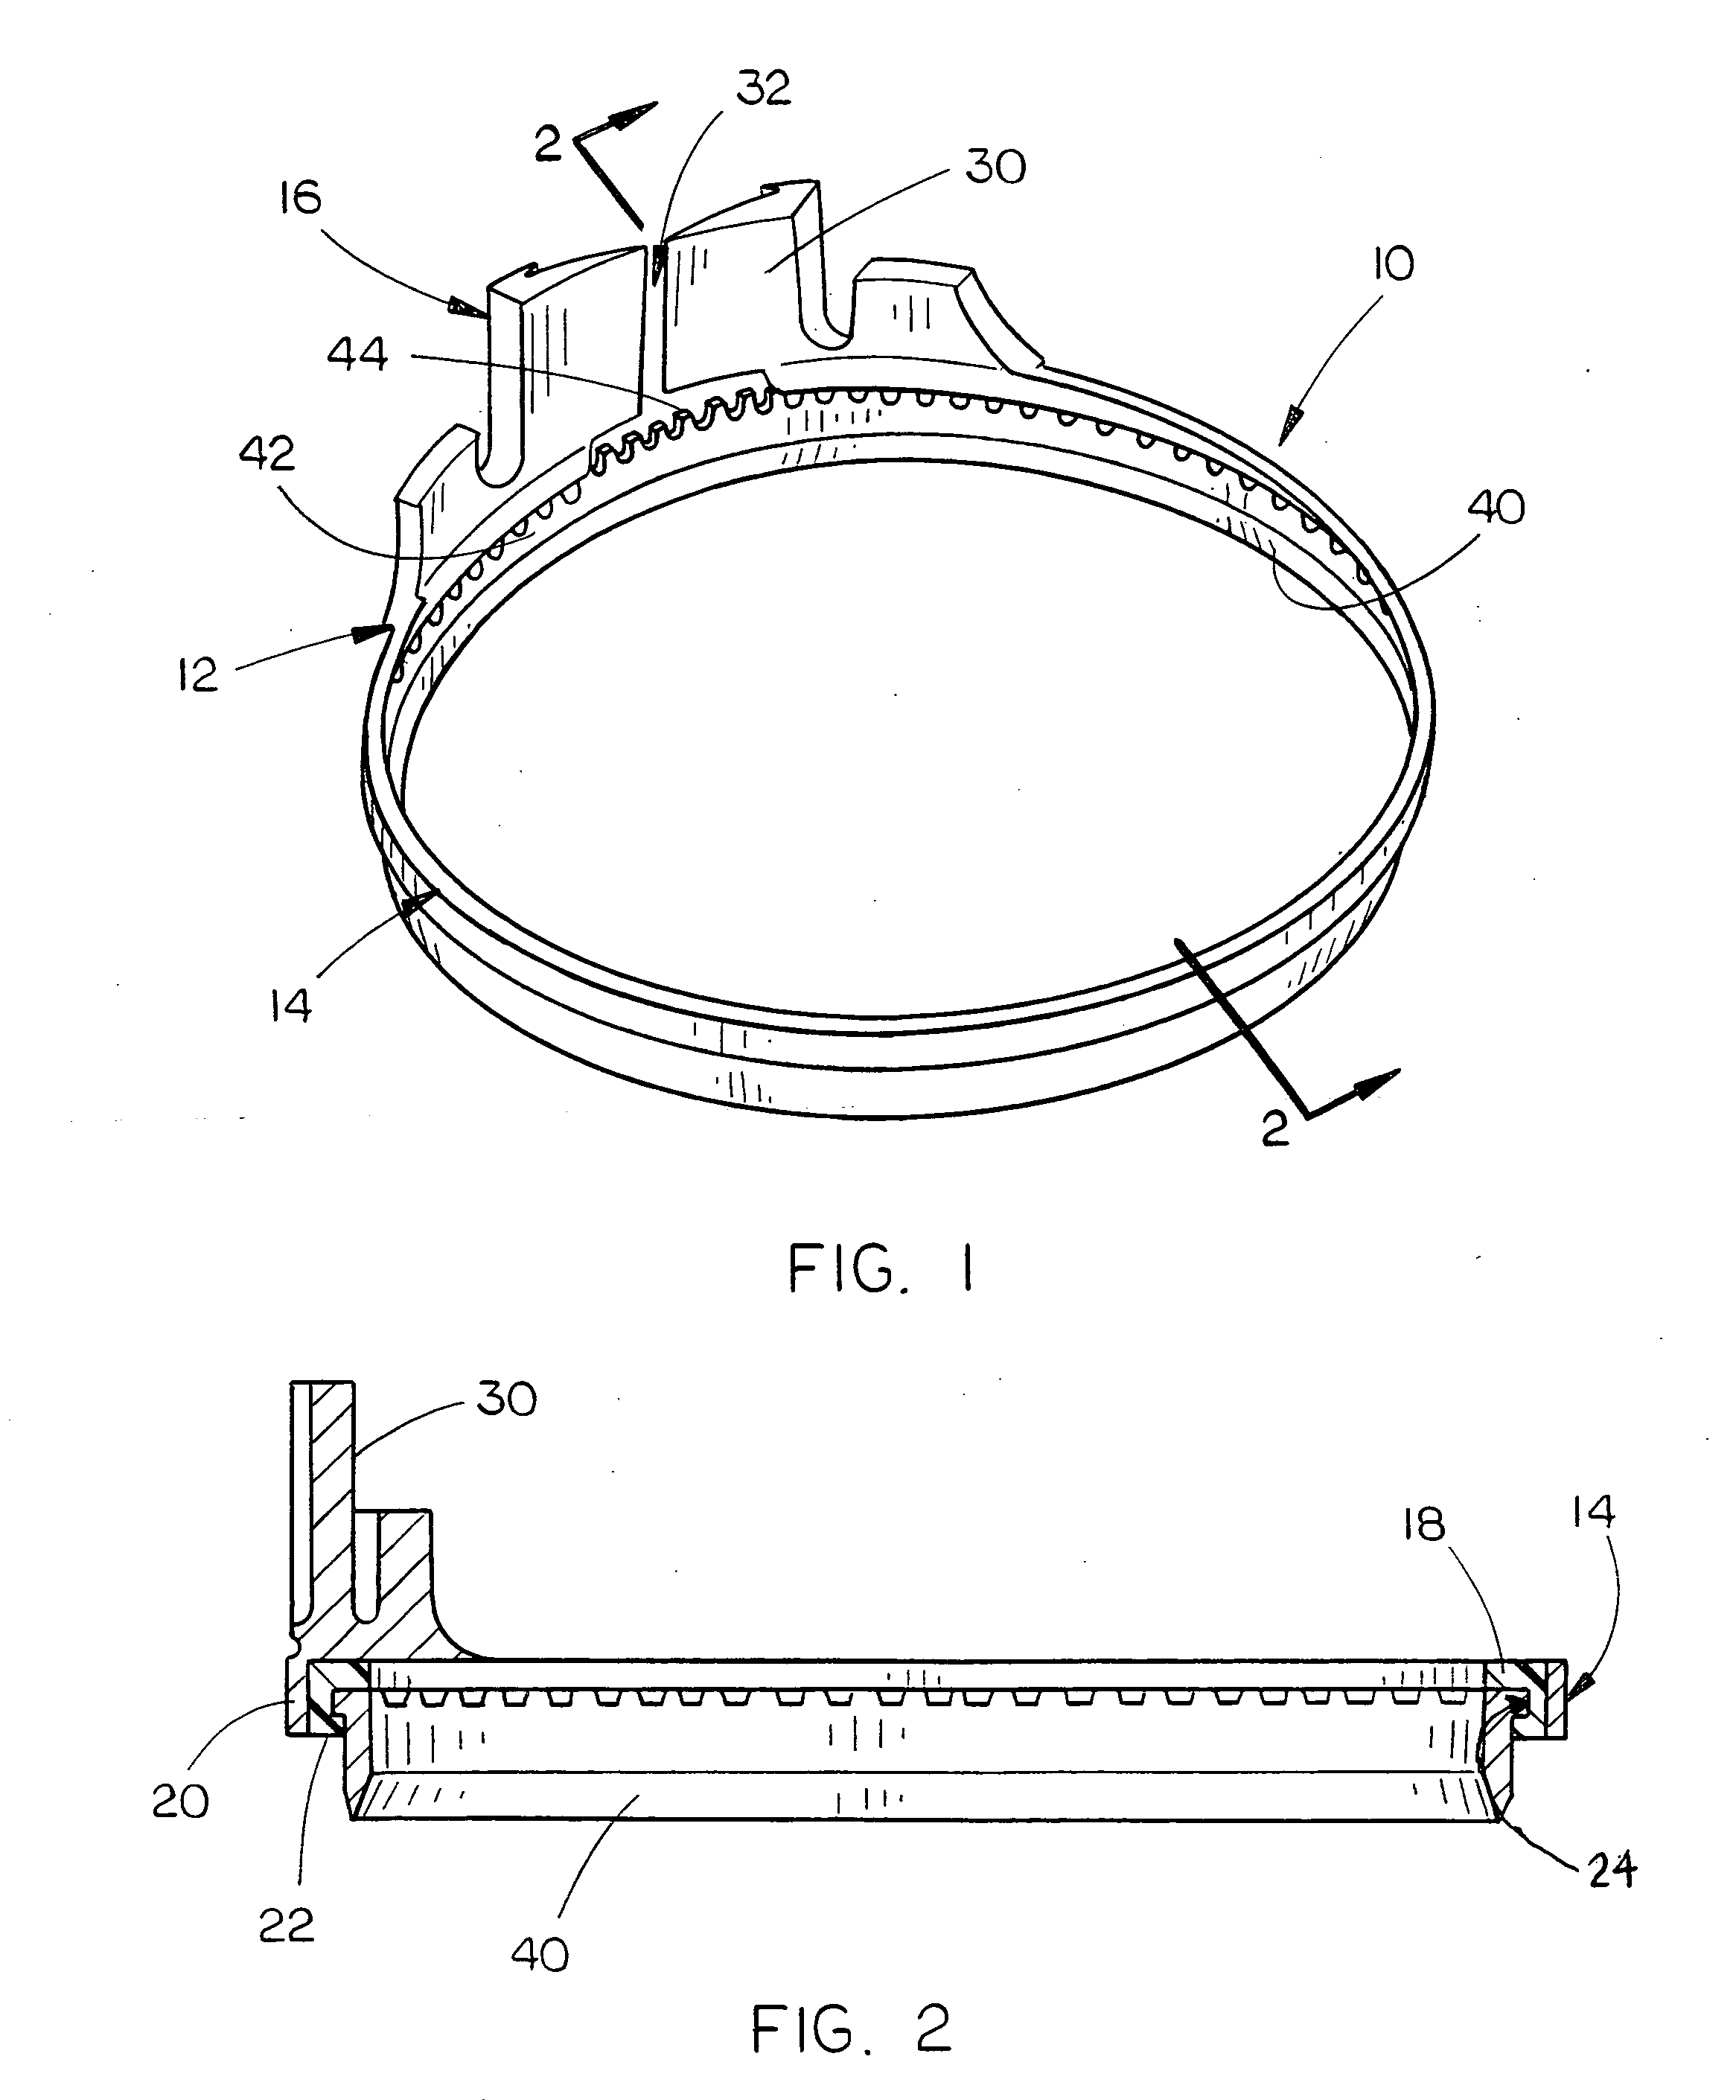 Molded plastic and metal combination cutting blade